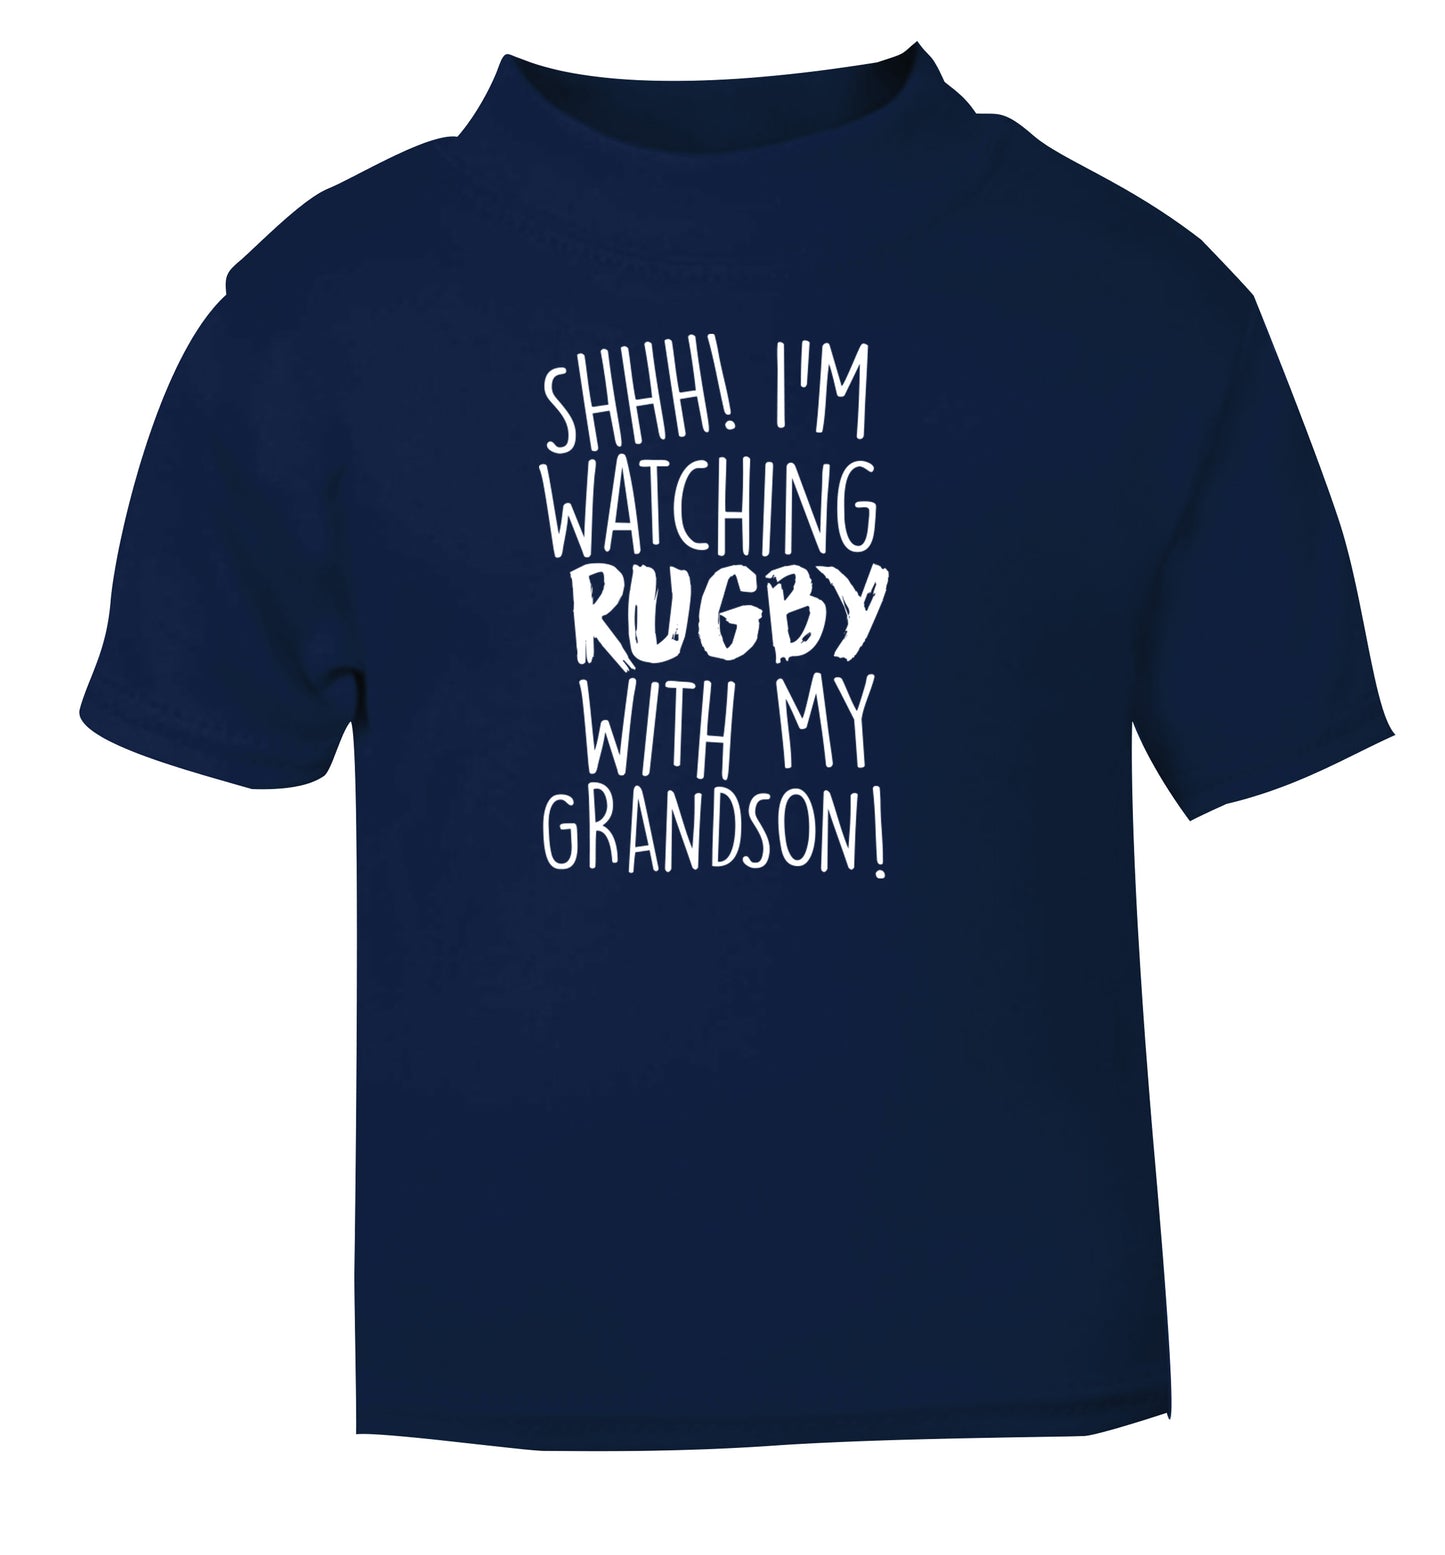 Shh I'm watching rugby with my grandson navy Baby Toddler Tshirt 2 Years